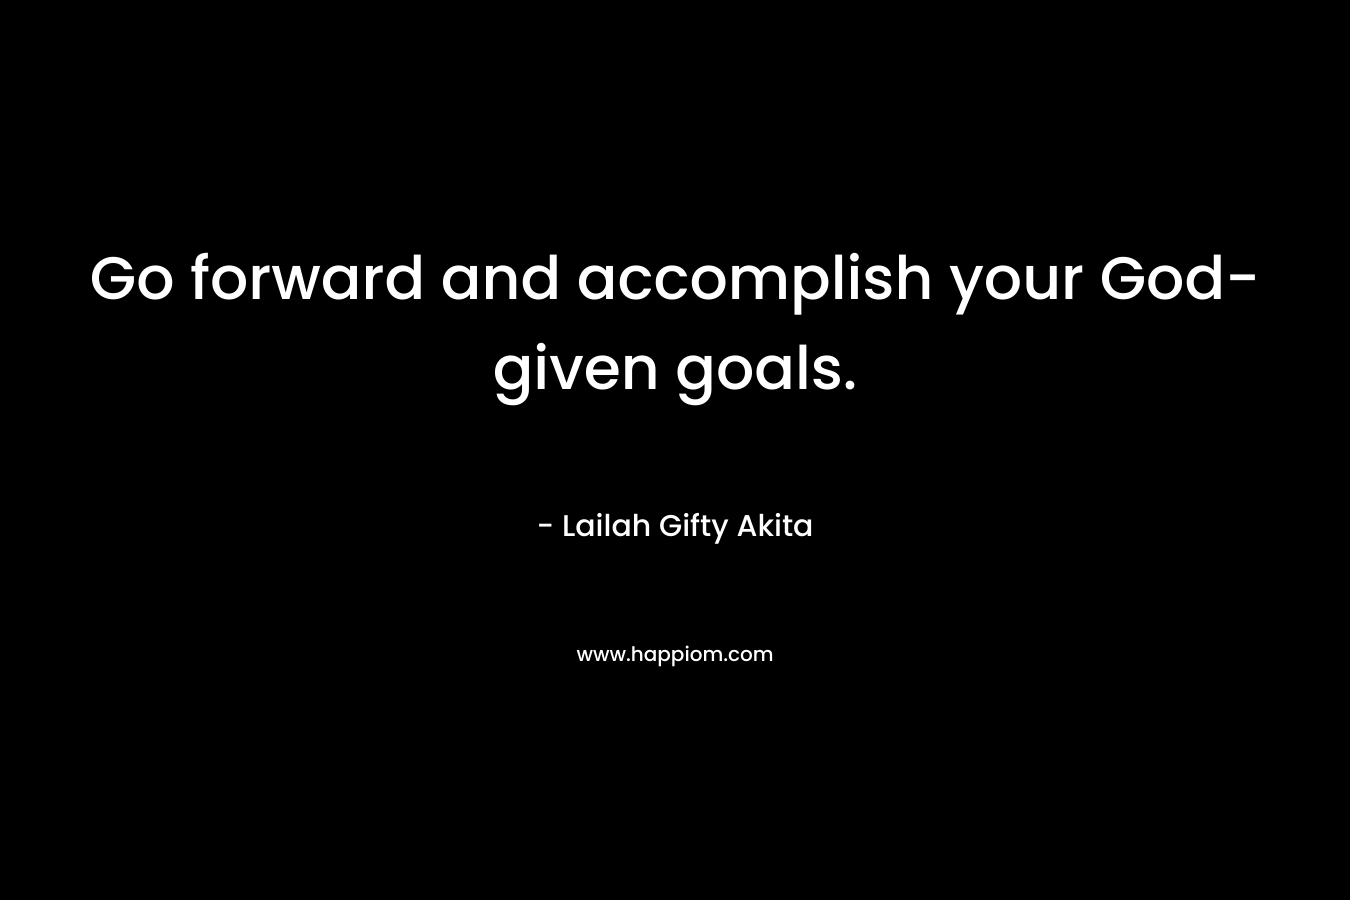 Go forward and accomplish your God-given goals.